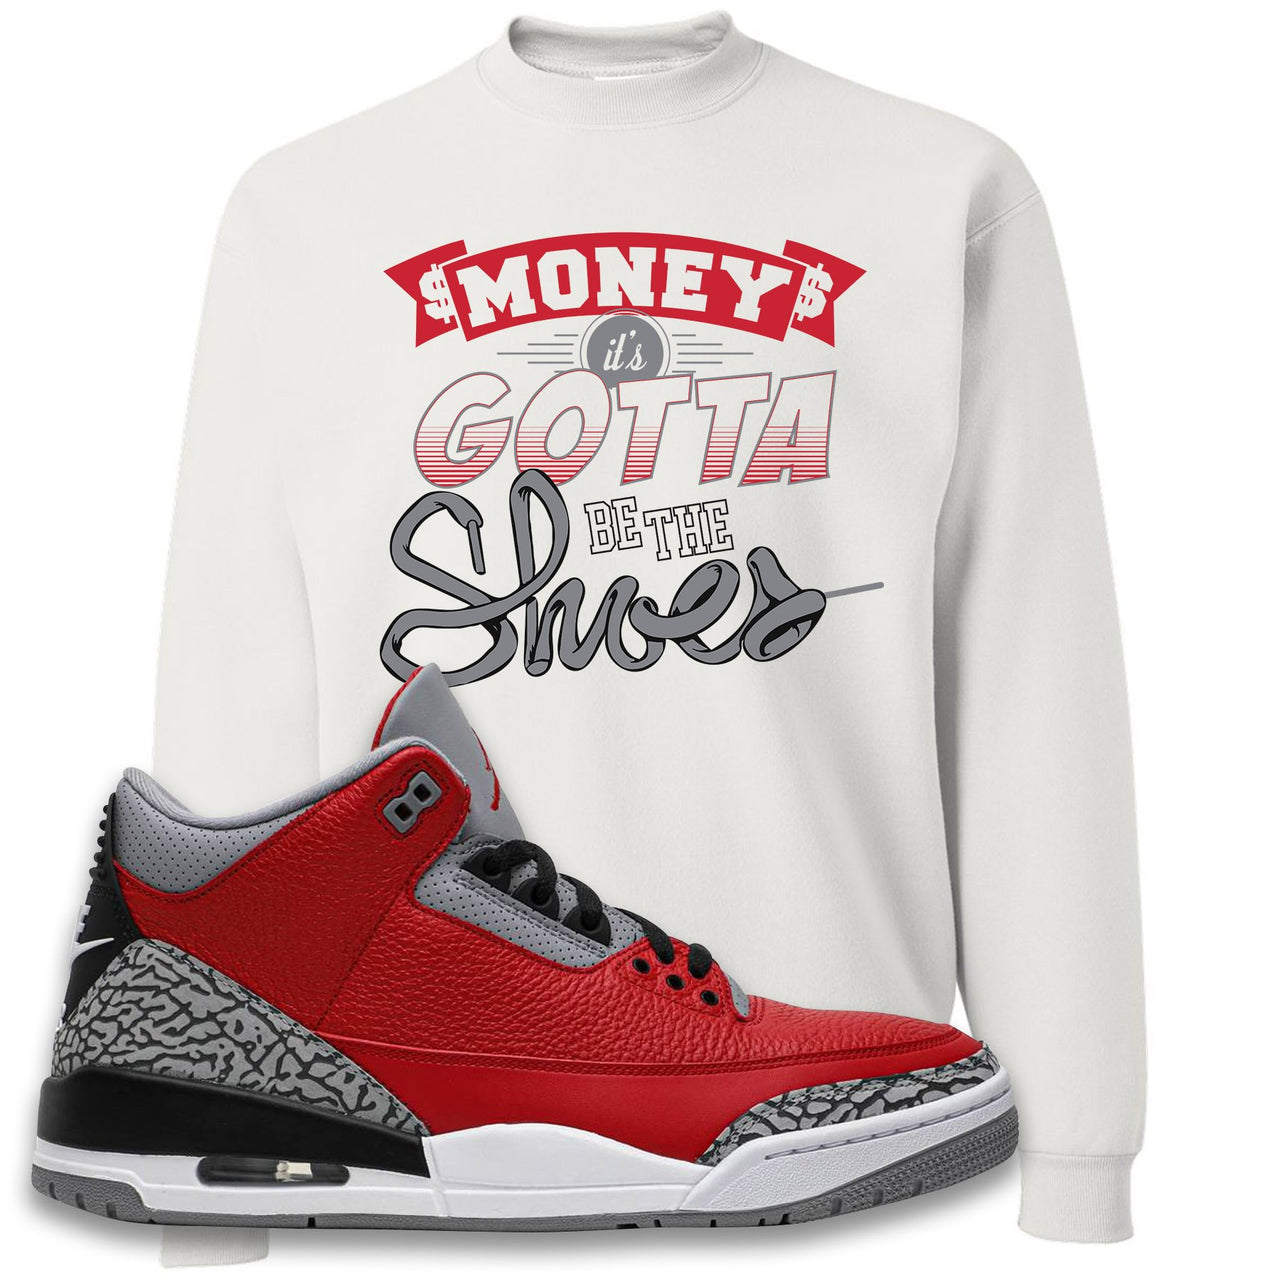 Chicago Exclusive Jordan 3 Red Cement Sneaker White Crewneck Sweatshirt | Crewneck to match Jordan 3 All Star Red Cement Shoes | Money Its The Shoes